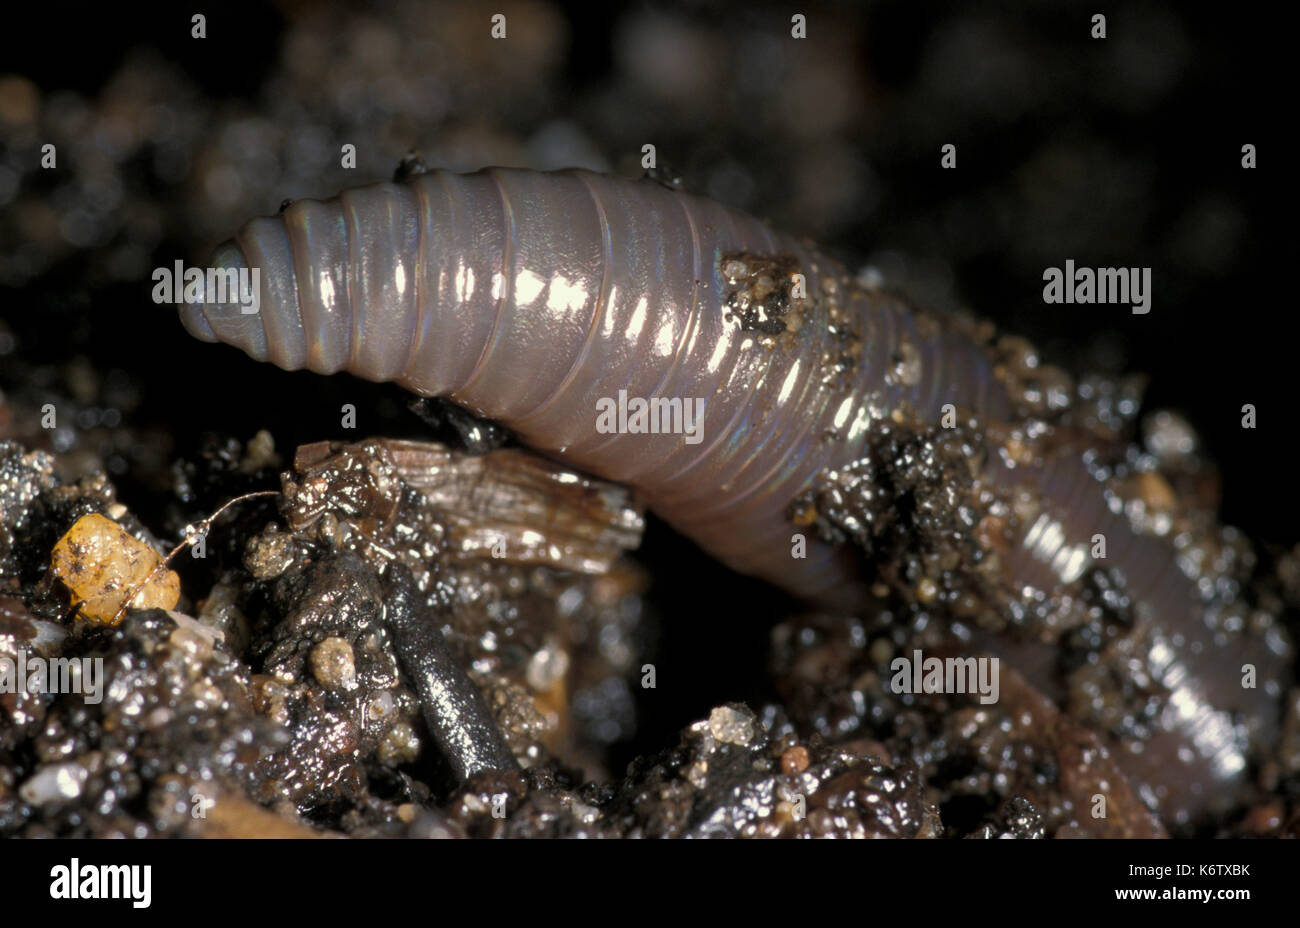 Common earthworm - close up of worm coming out the soil lumbricus